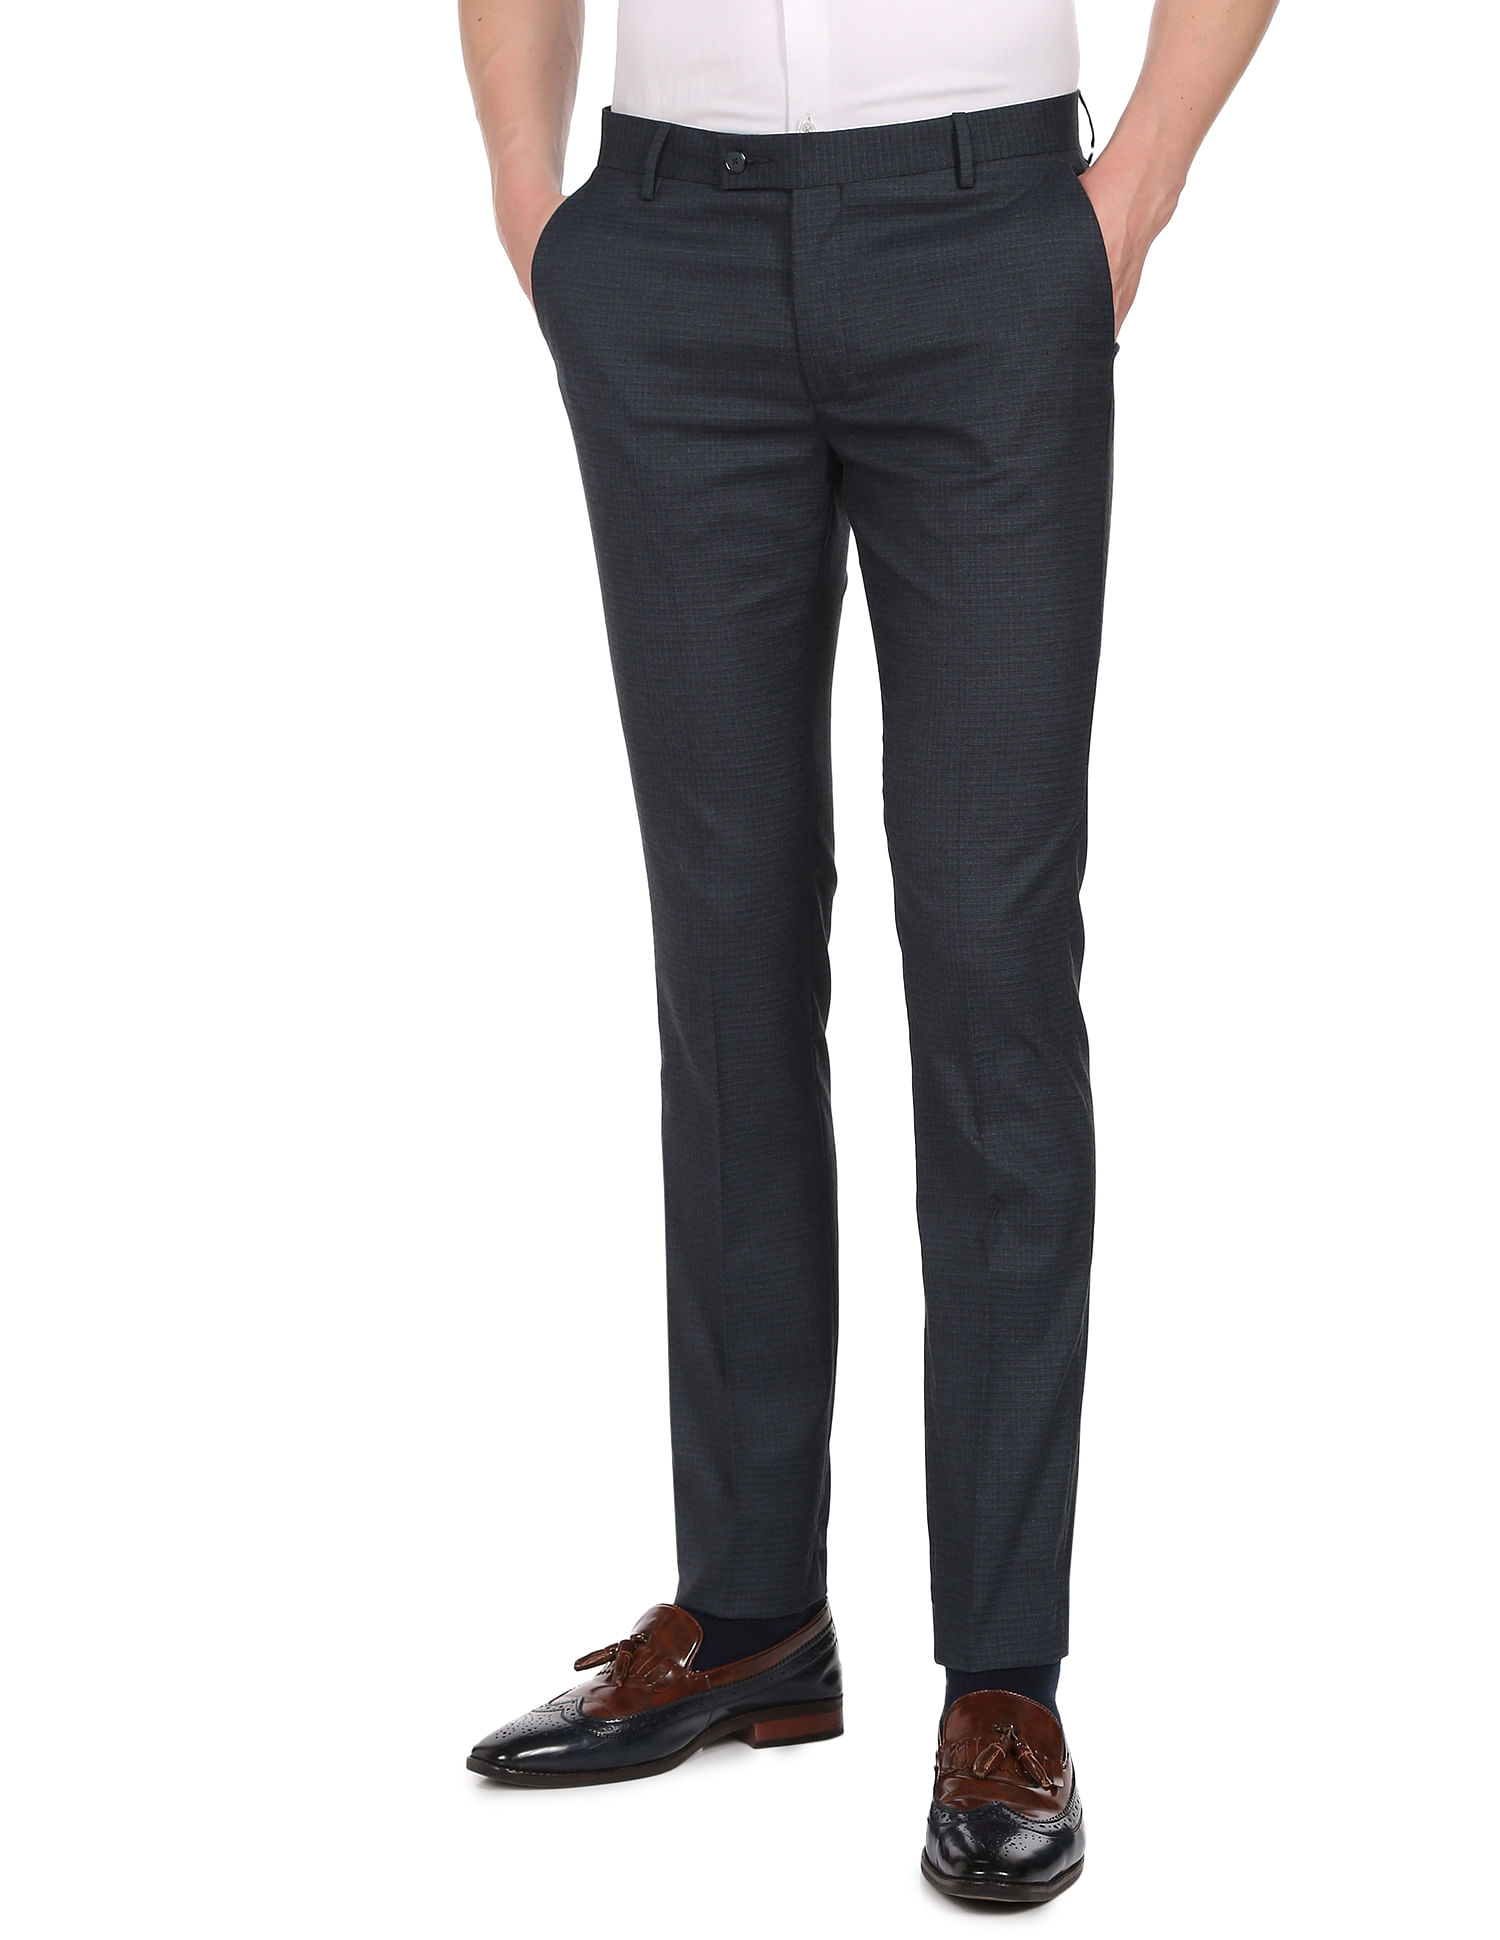 Looking for Men's formal Pants? Buy From Sainly– SAINLY